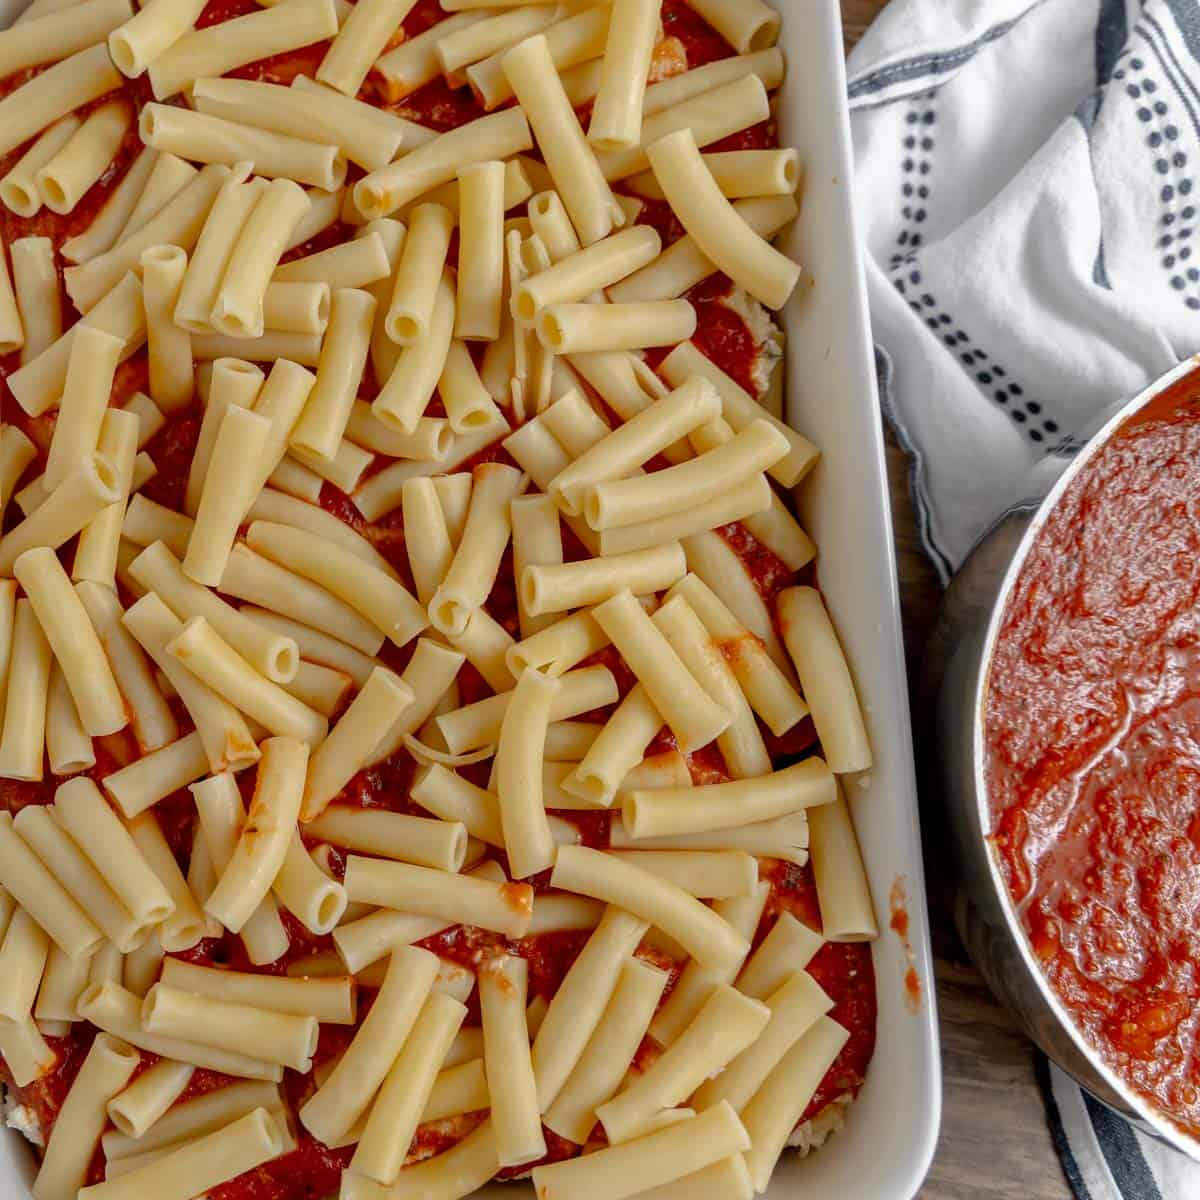 Ziti on top of sauce in a pan. Extra sauce on the side.